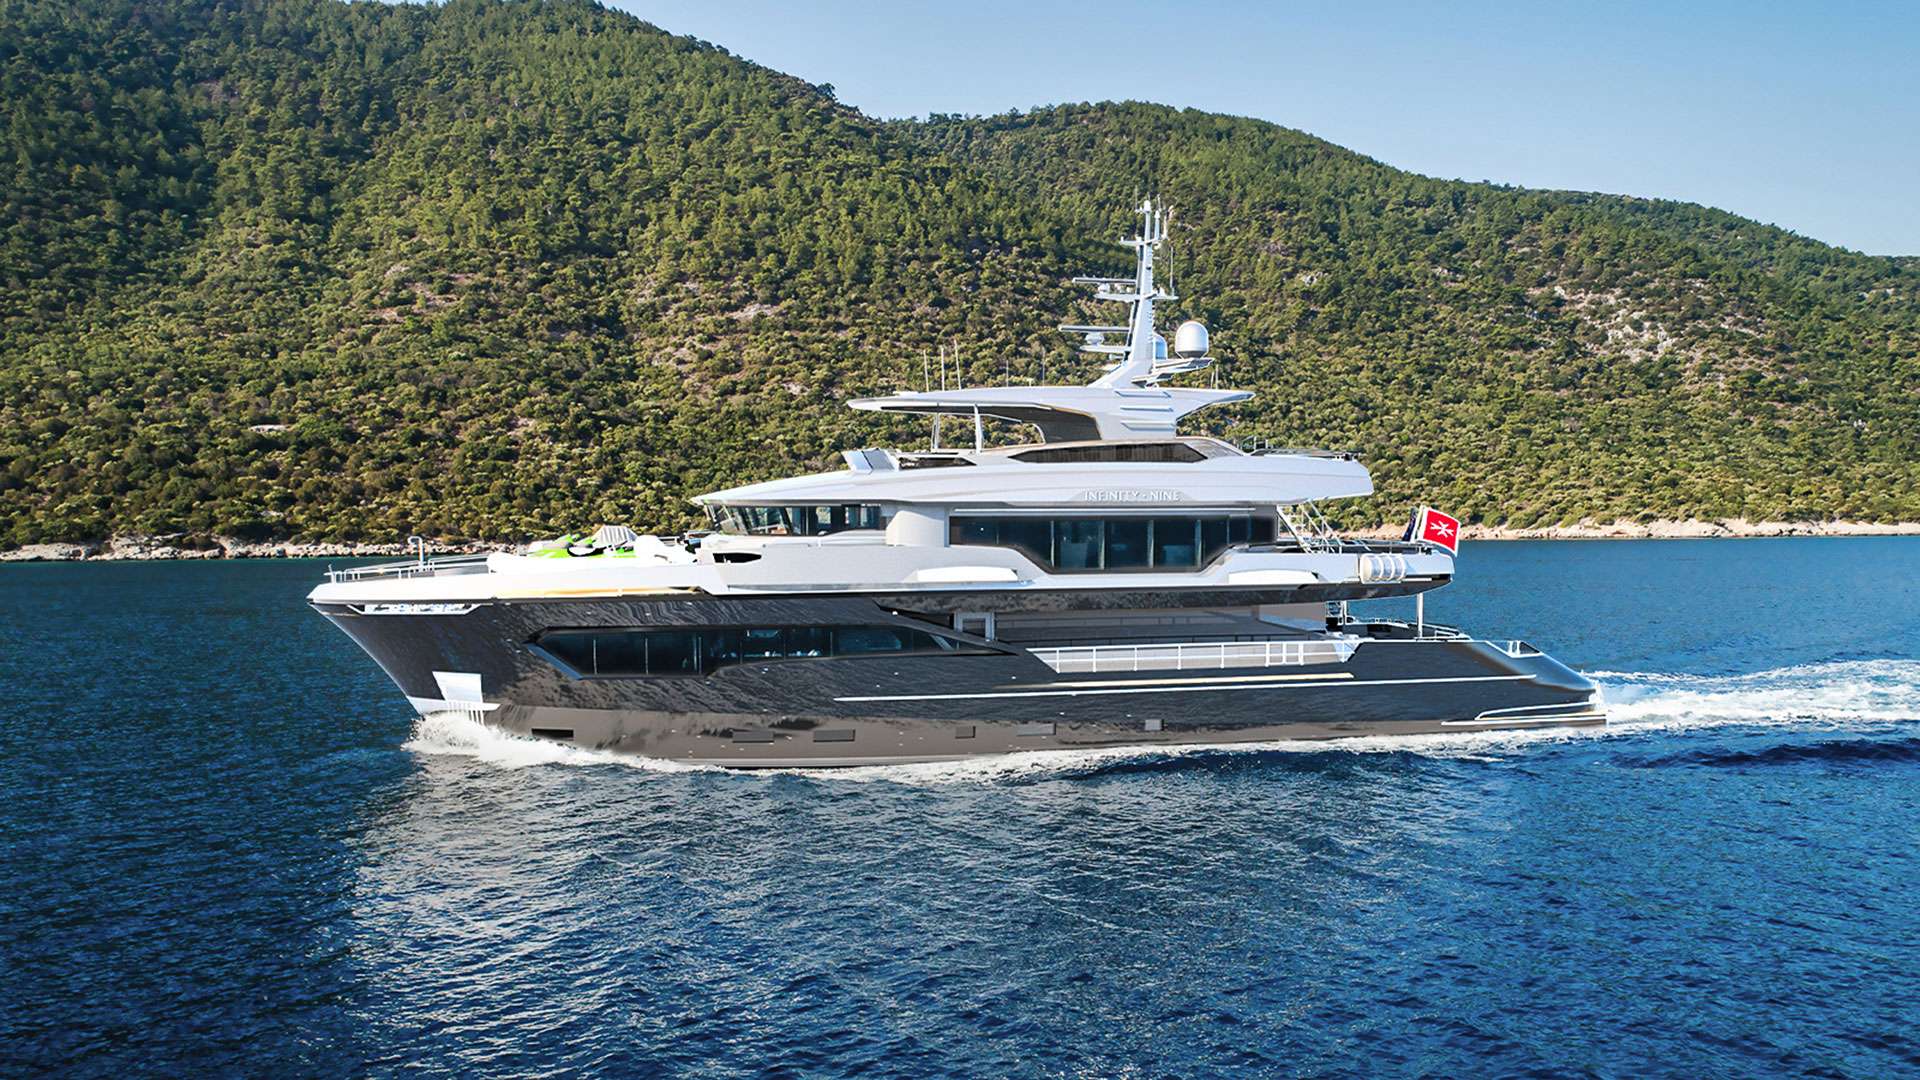 AvA Yachts Announces a Construction Update on the Progress of M/Y Infinity Nine